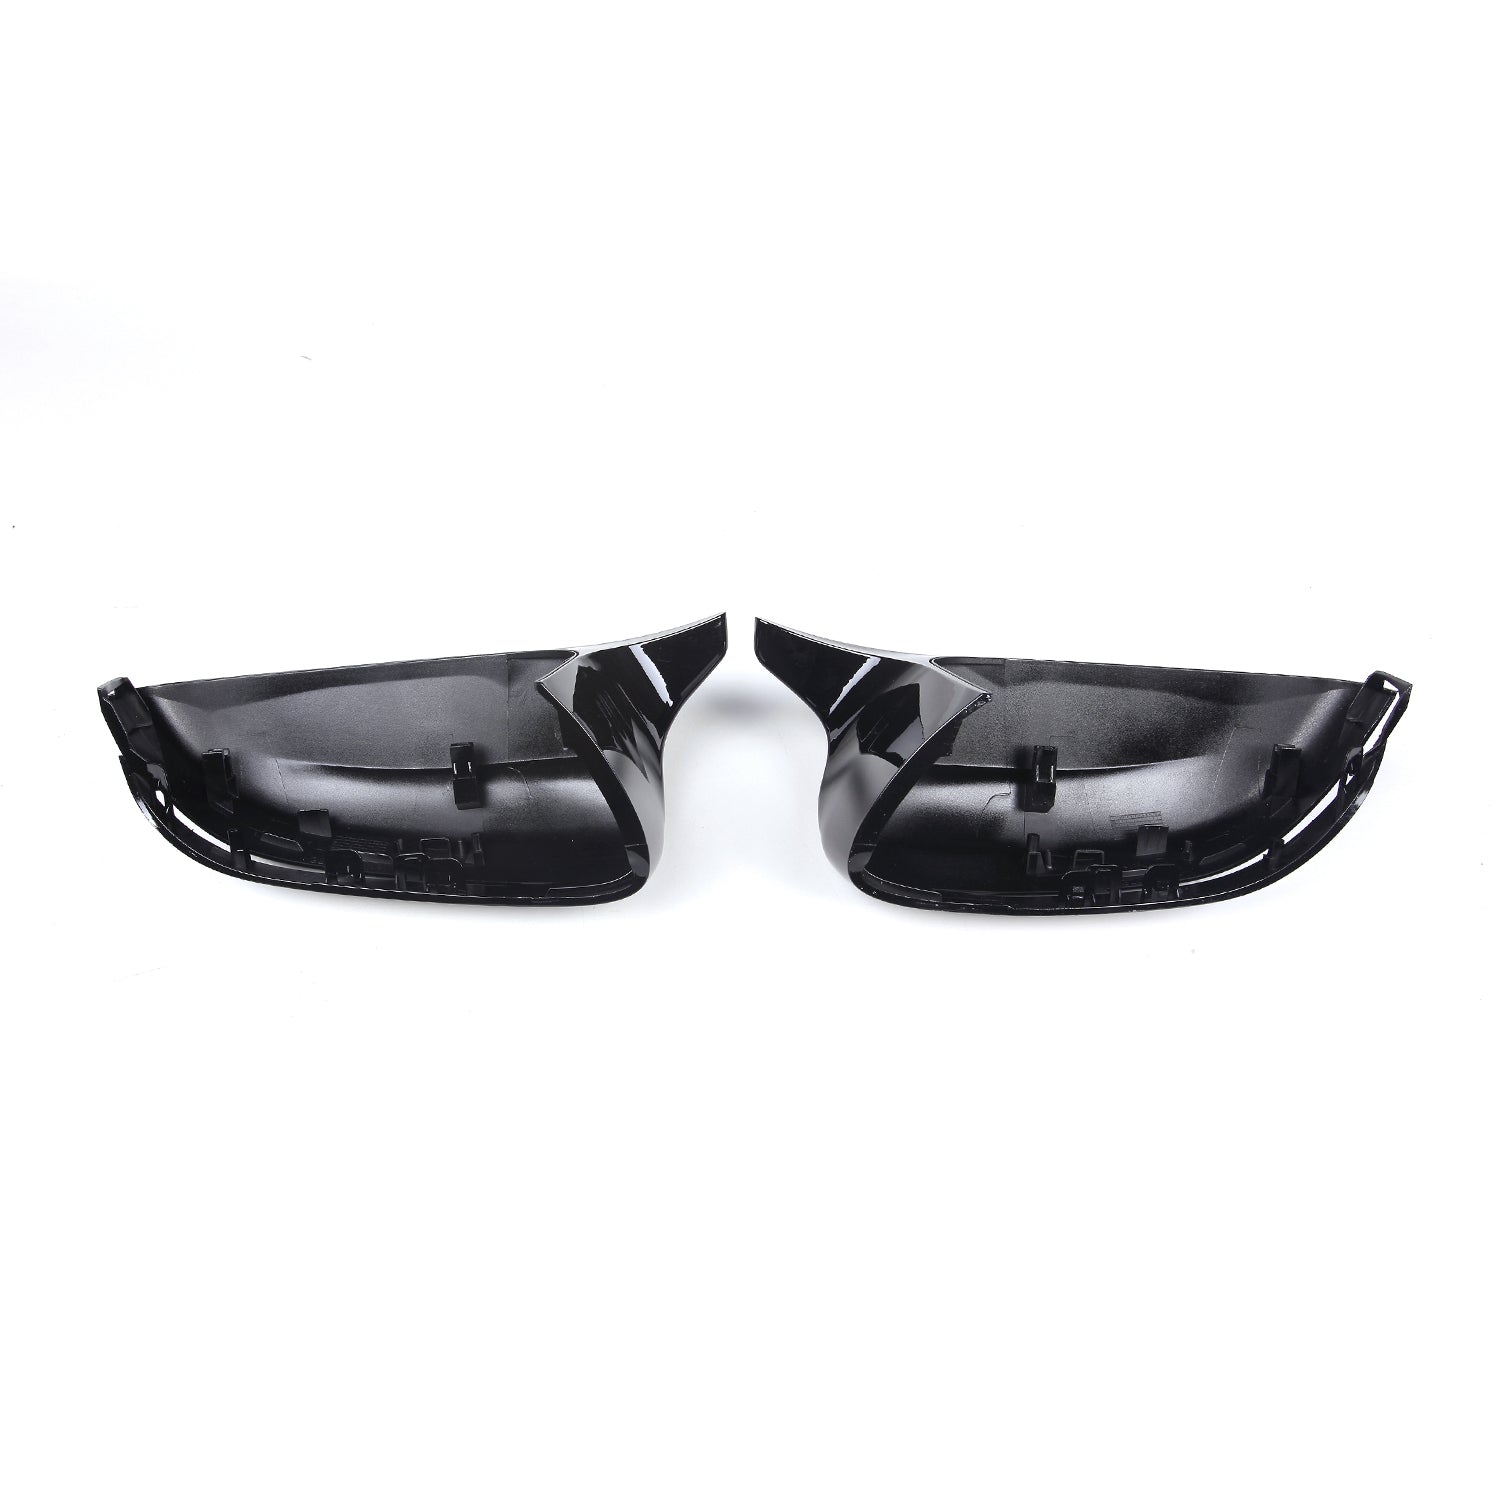 MHC Black BMW M Style LHD Wing Mirror Covers For G20 G22 G30